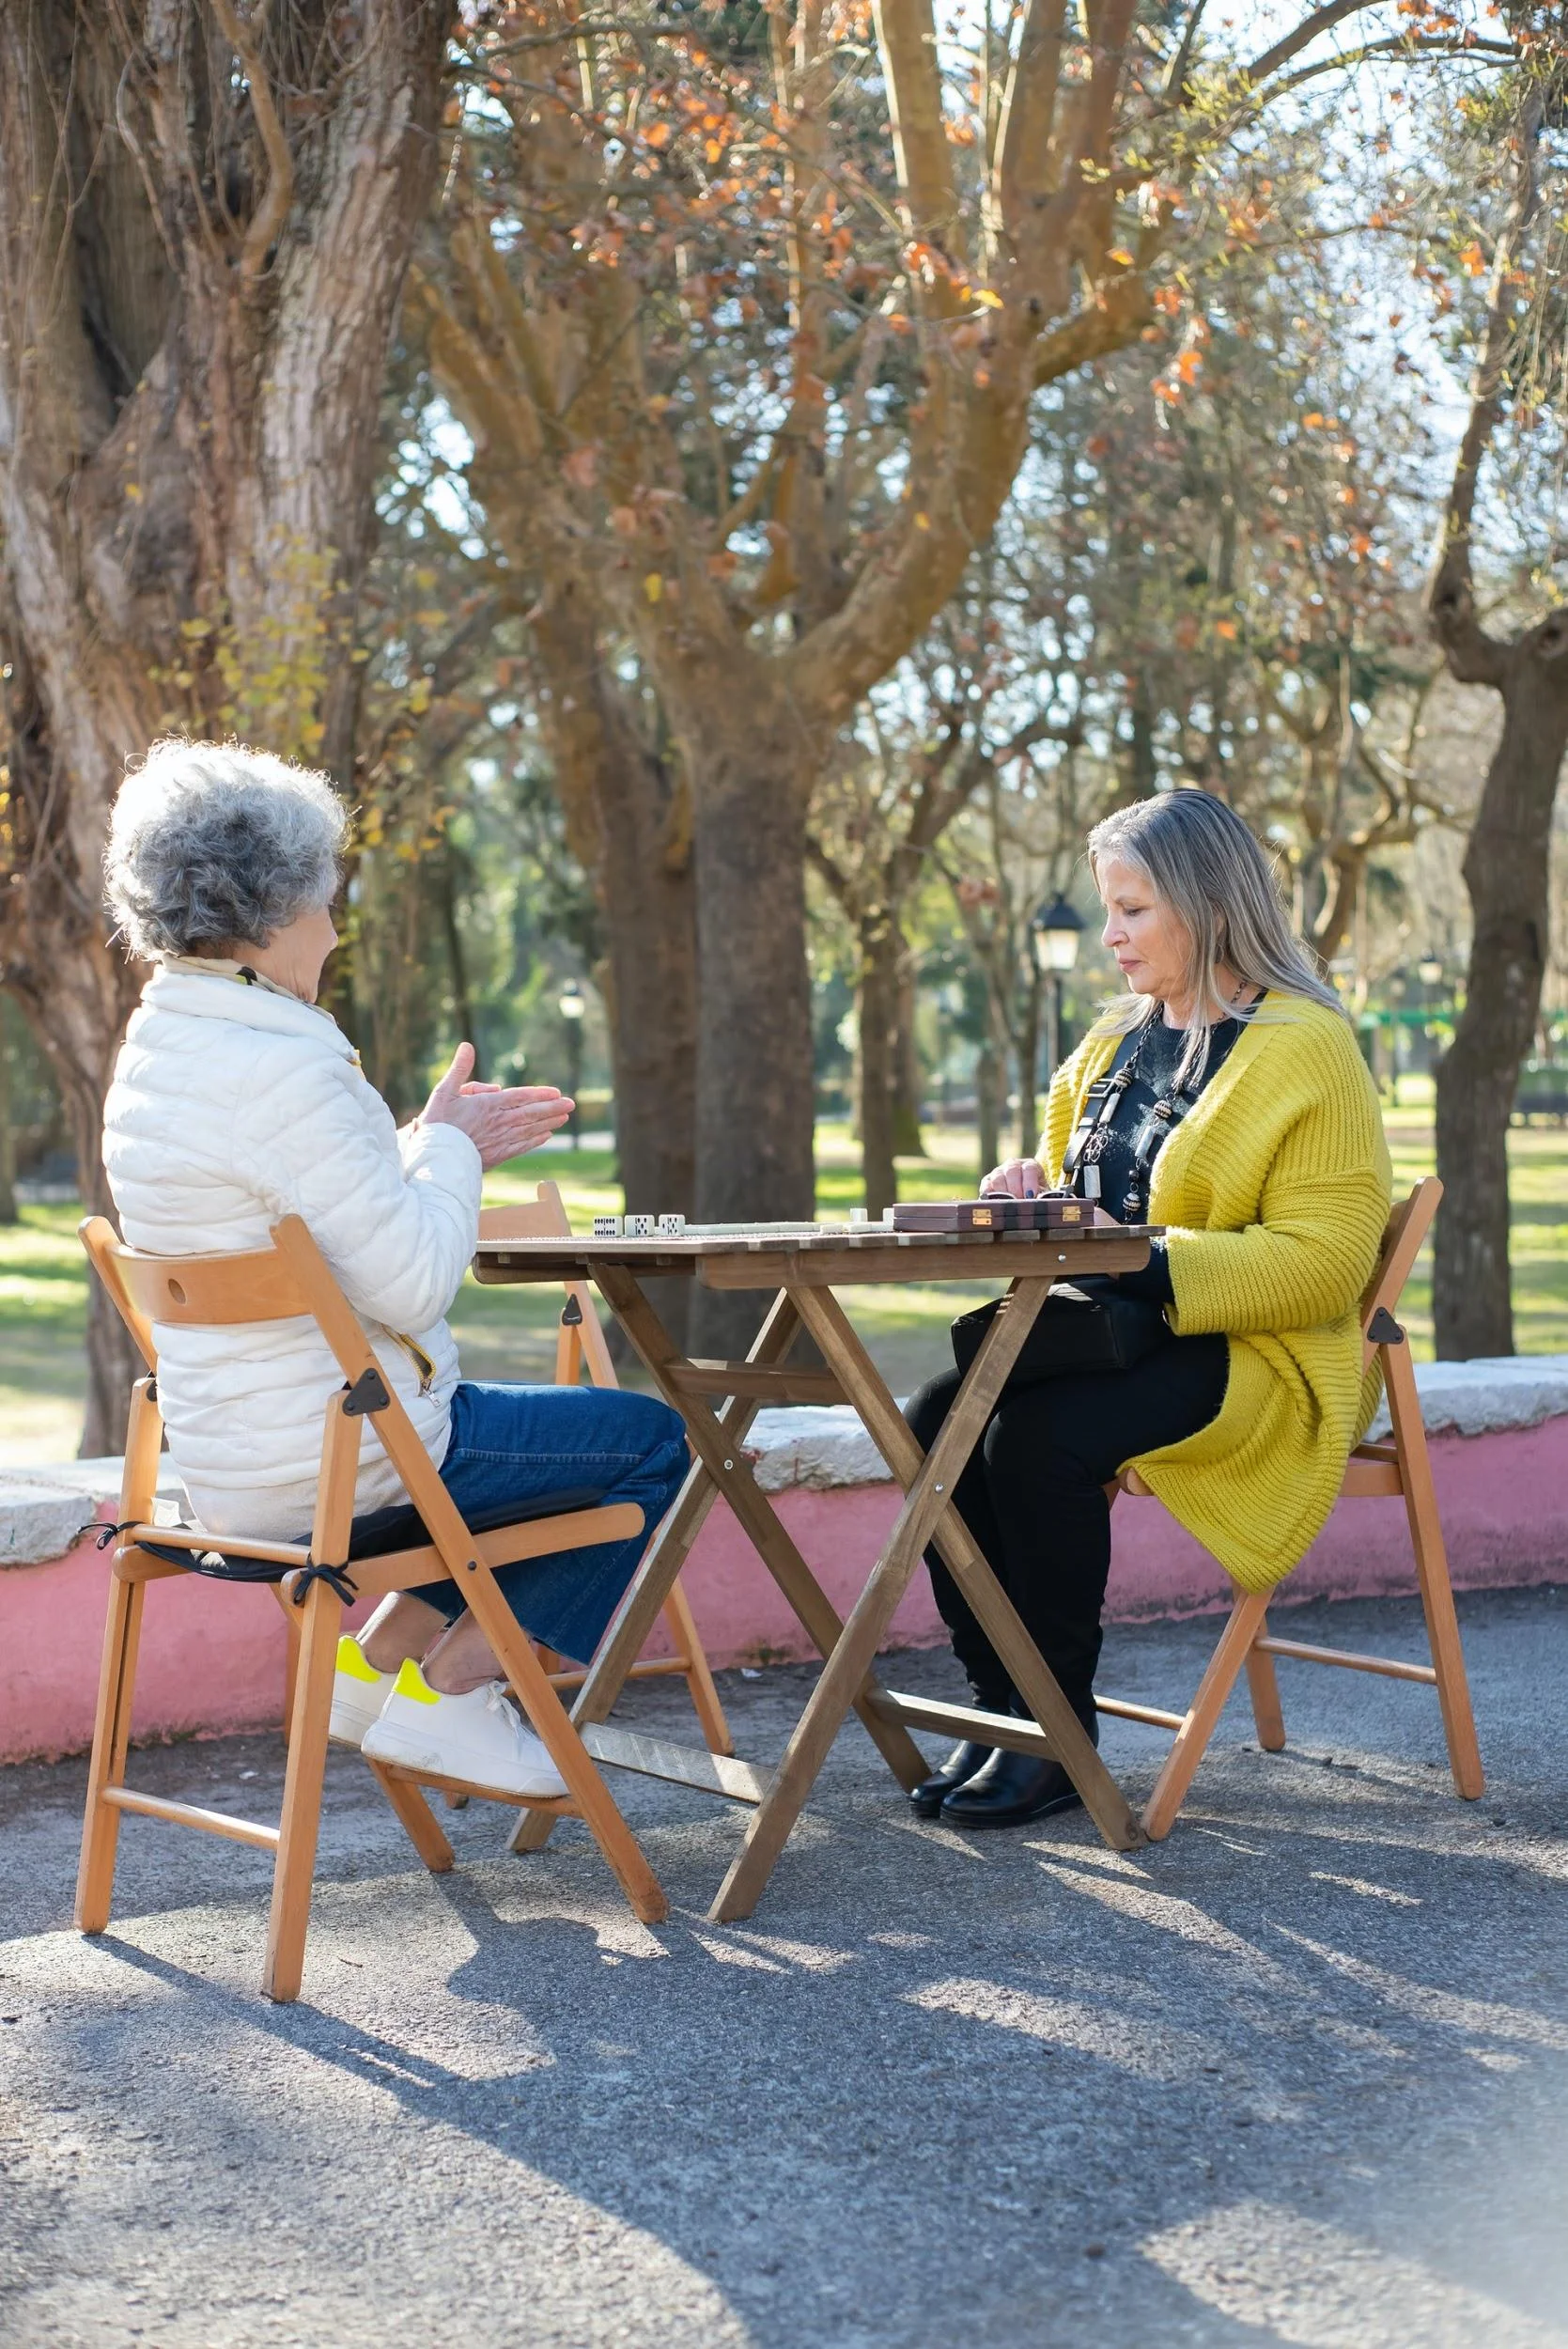 activities to help seniors find community and avoid social isolation